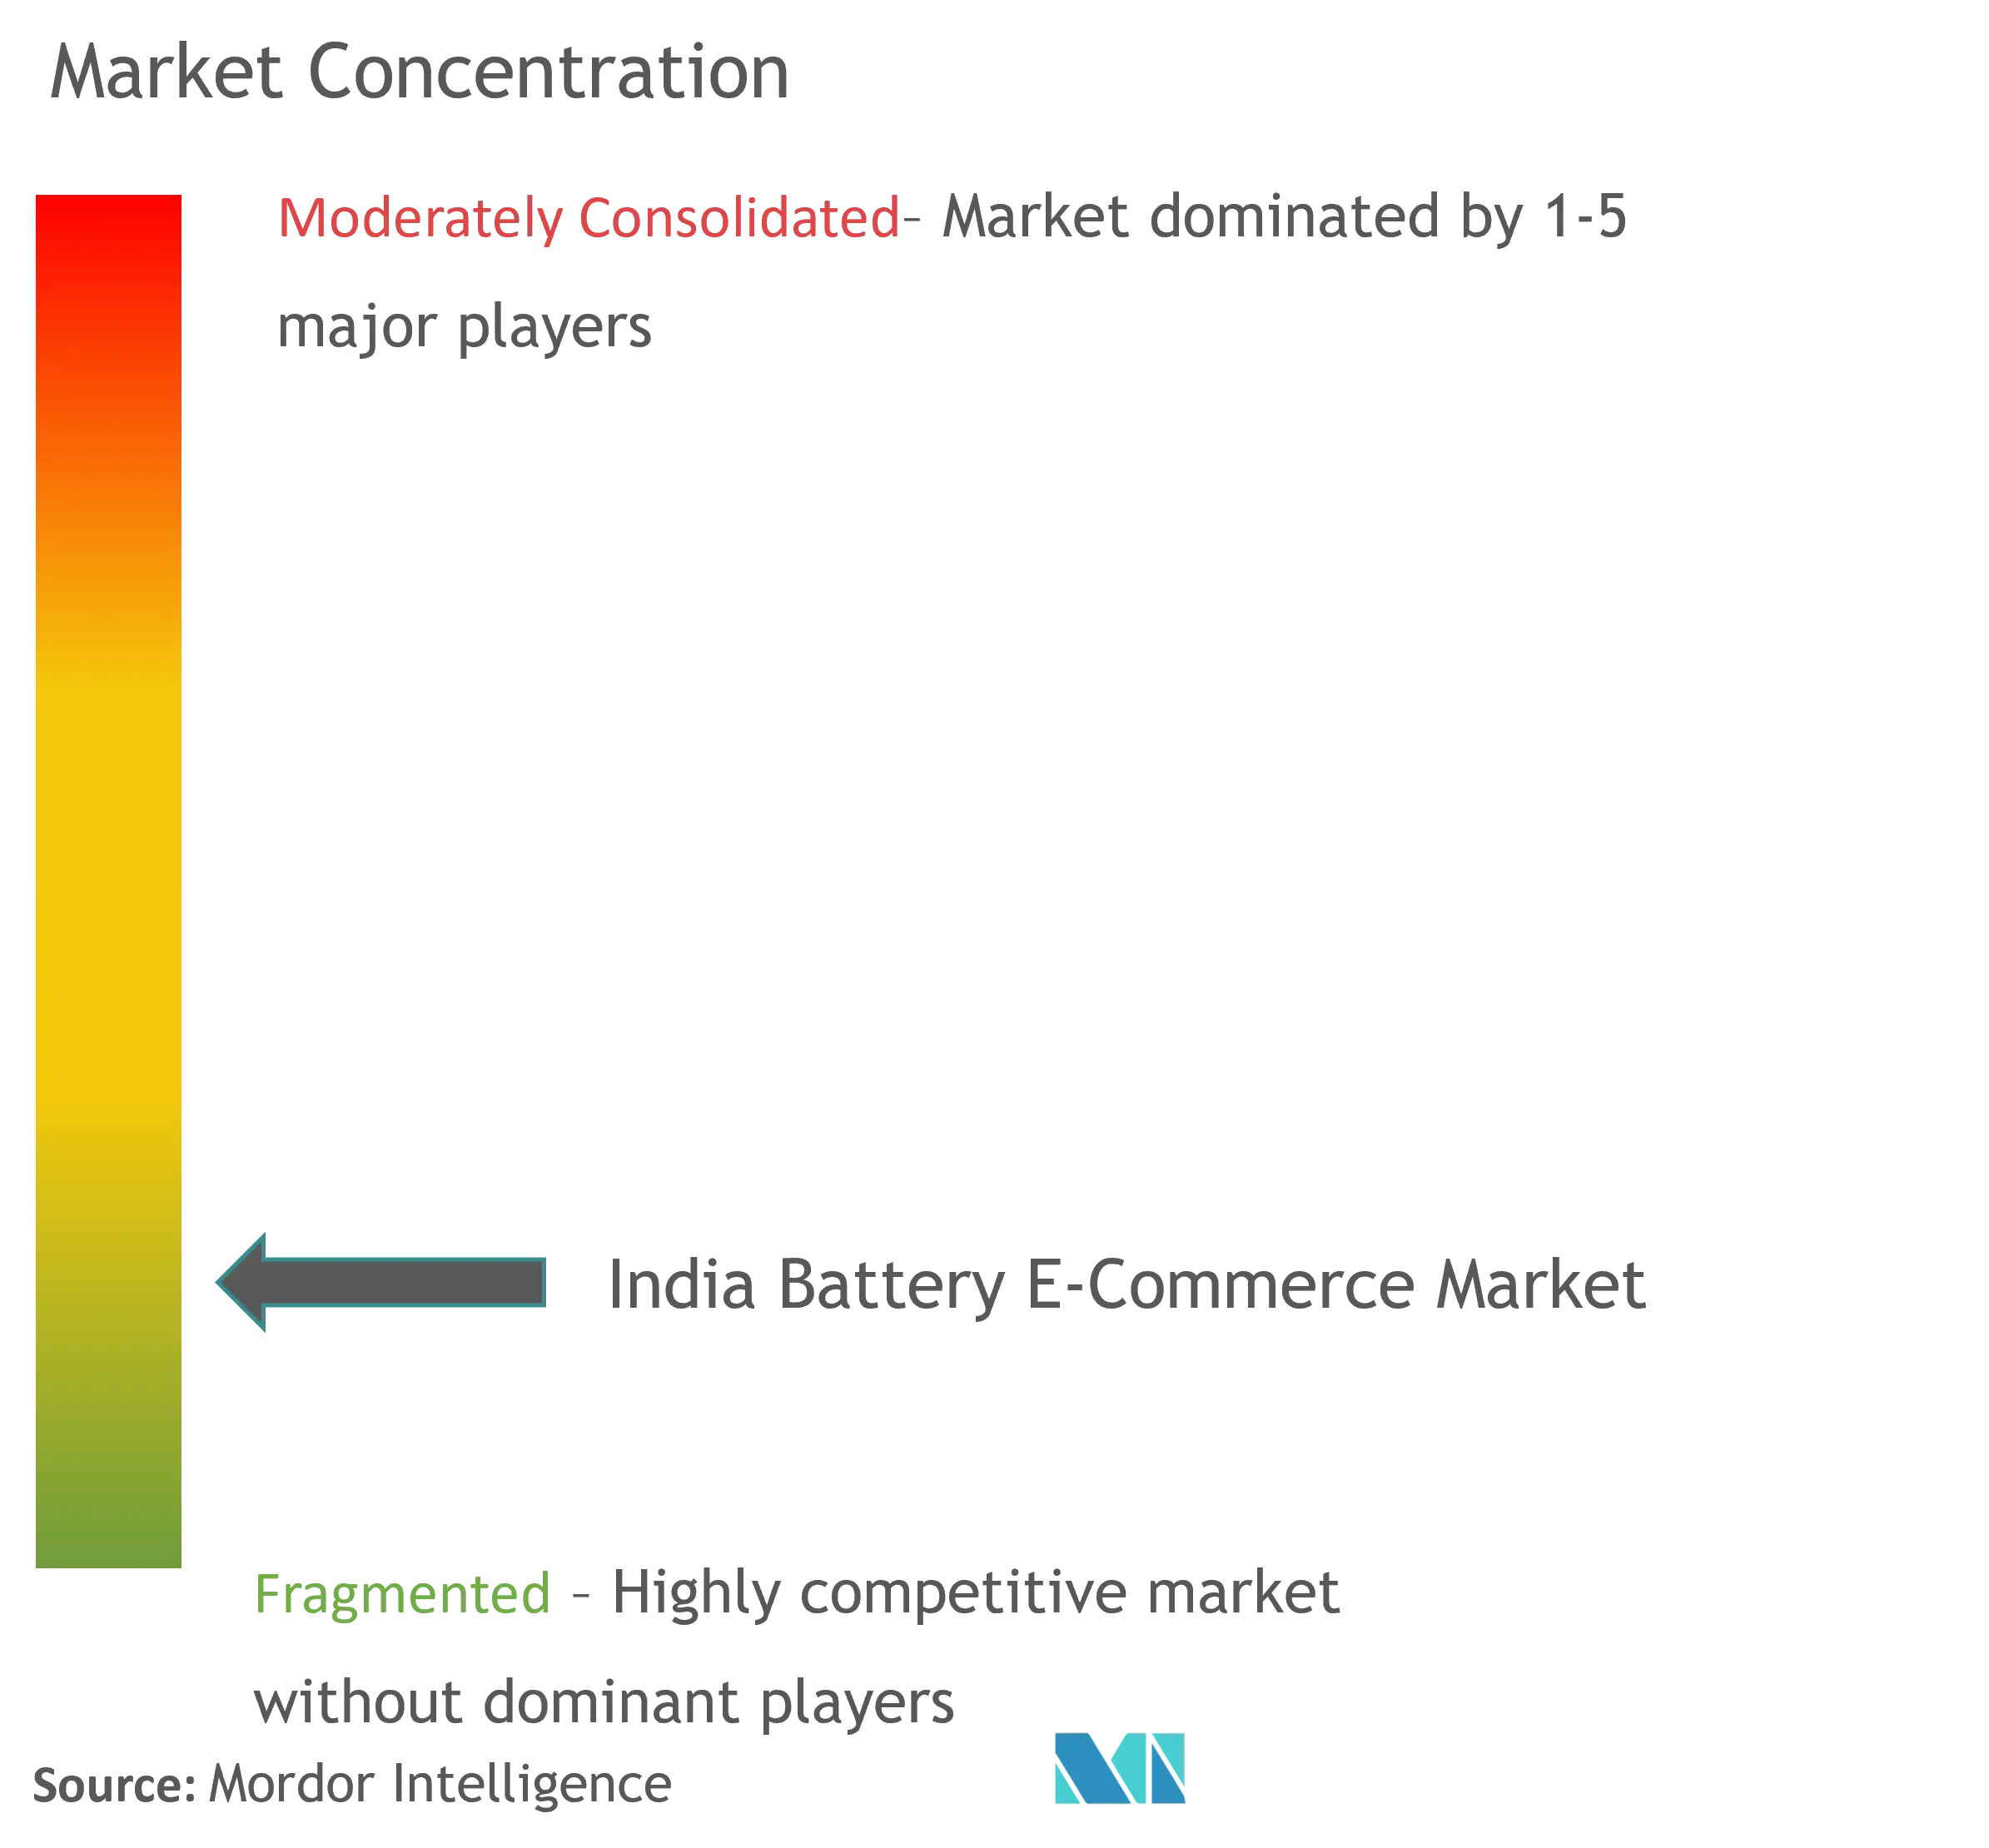 India Battery E-commerce Market Concentration